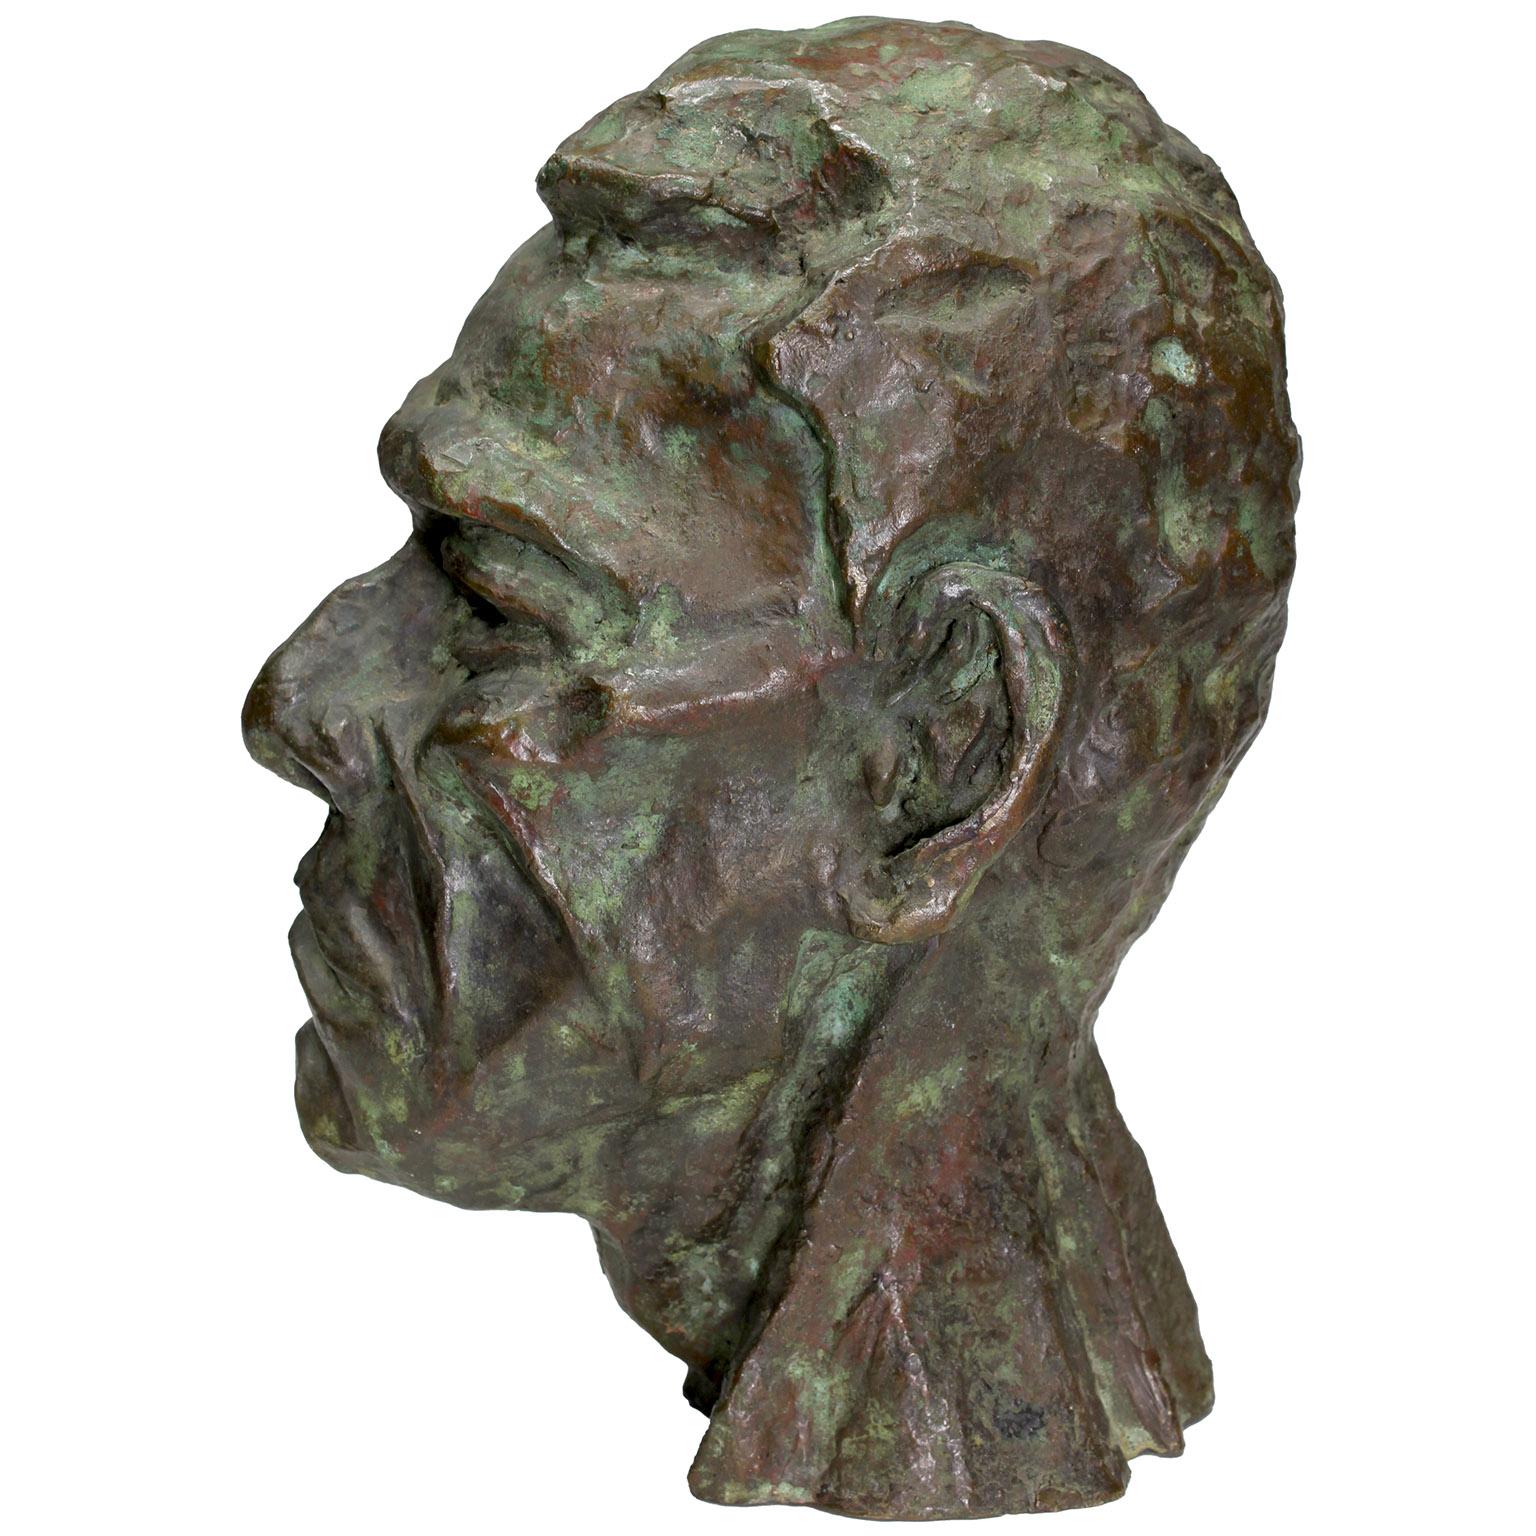 Aesthetic Movement Fine Bronze Bust of a Man in Manner of Sir Jacob Epstein (British 1880-1959) For Sale